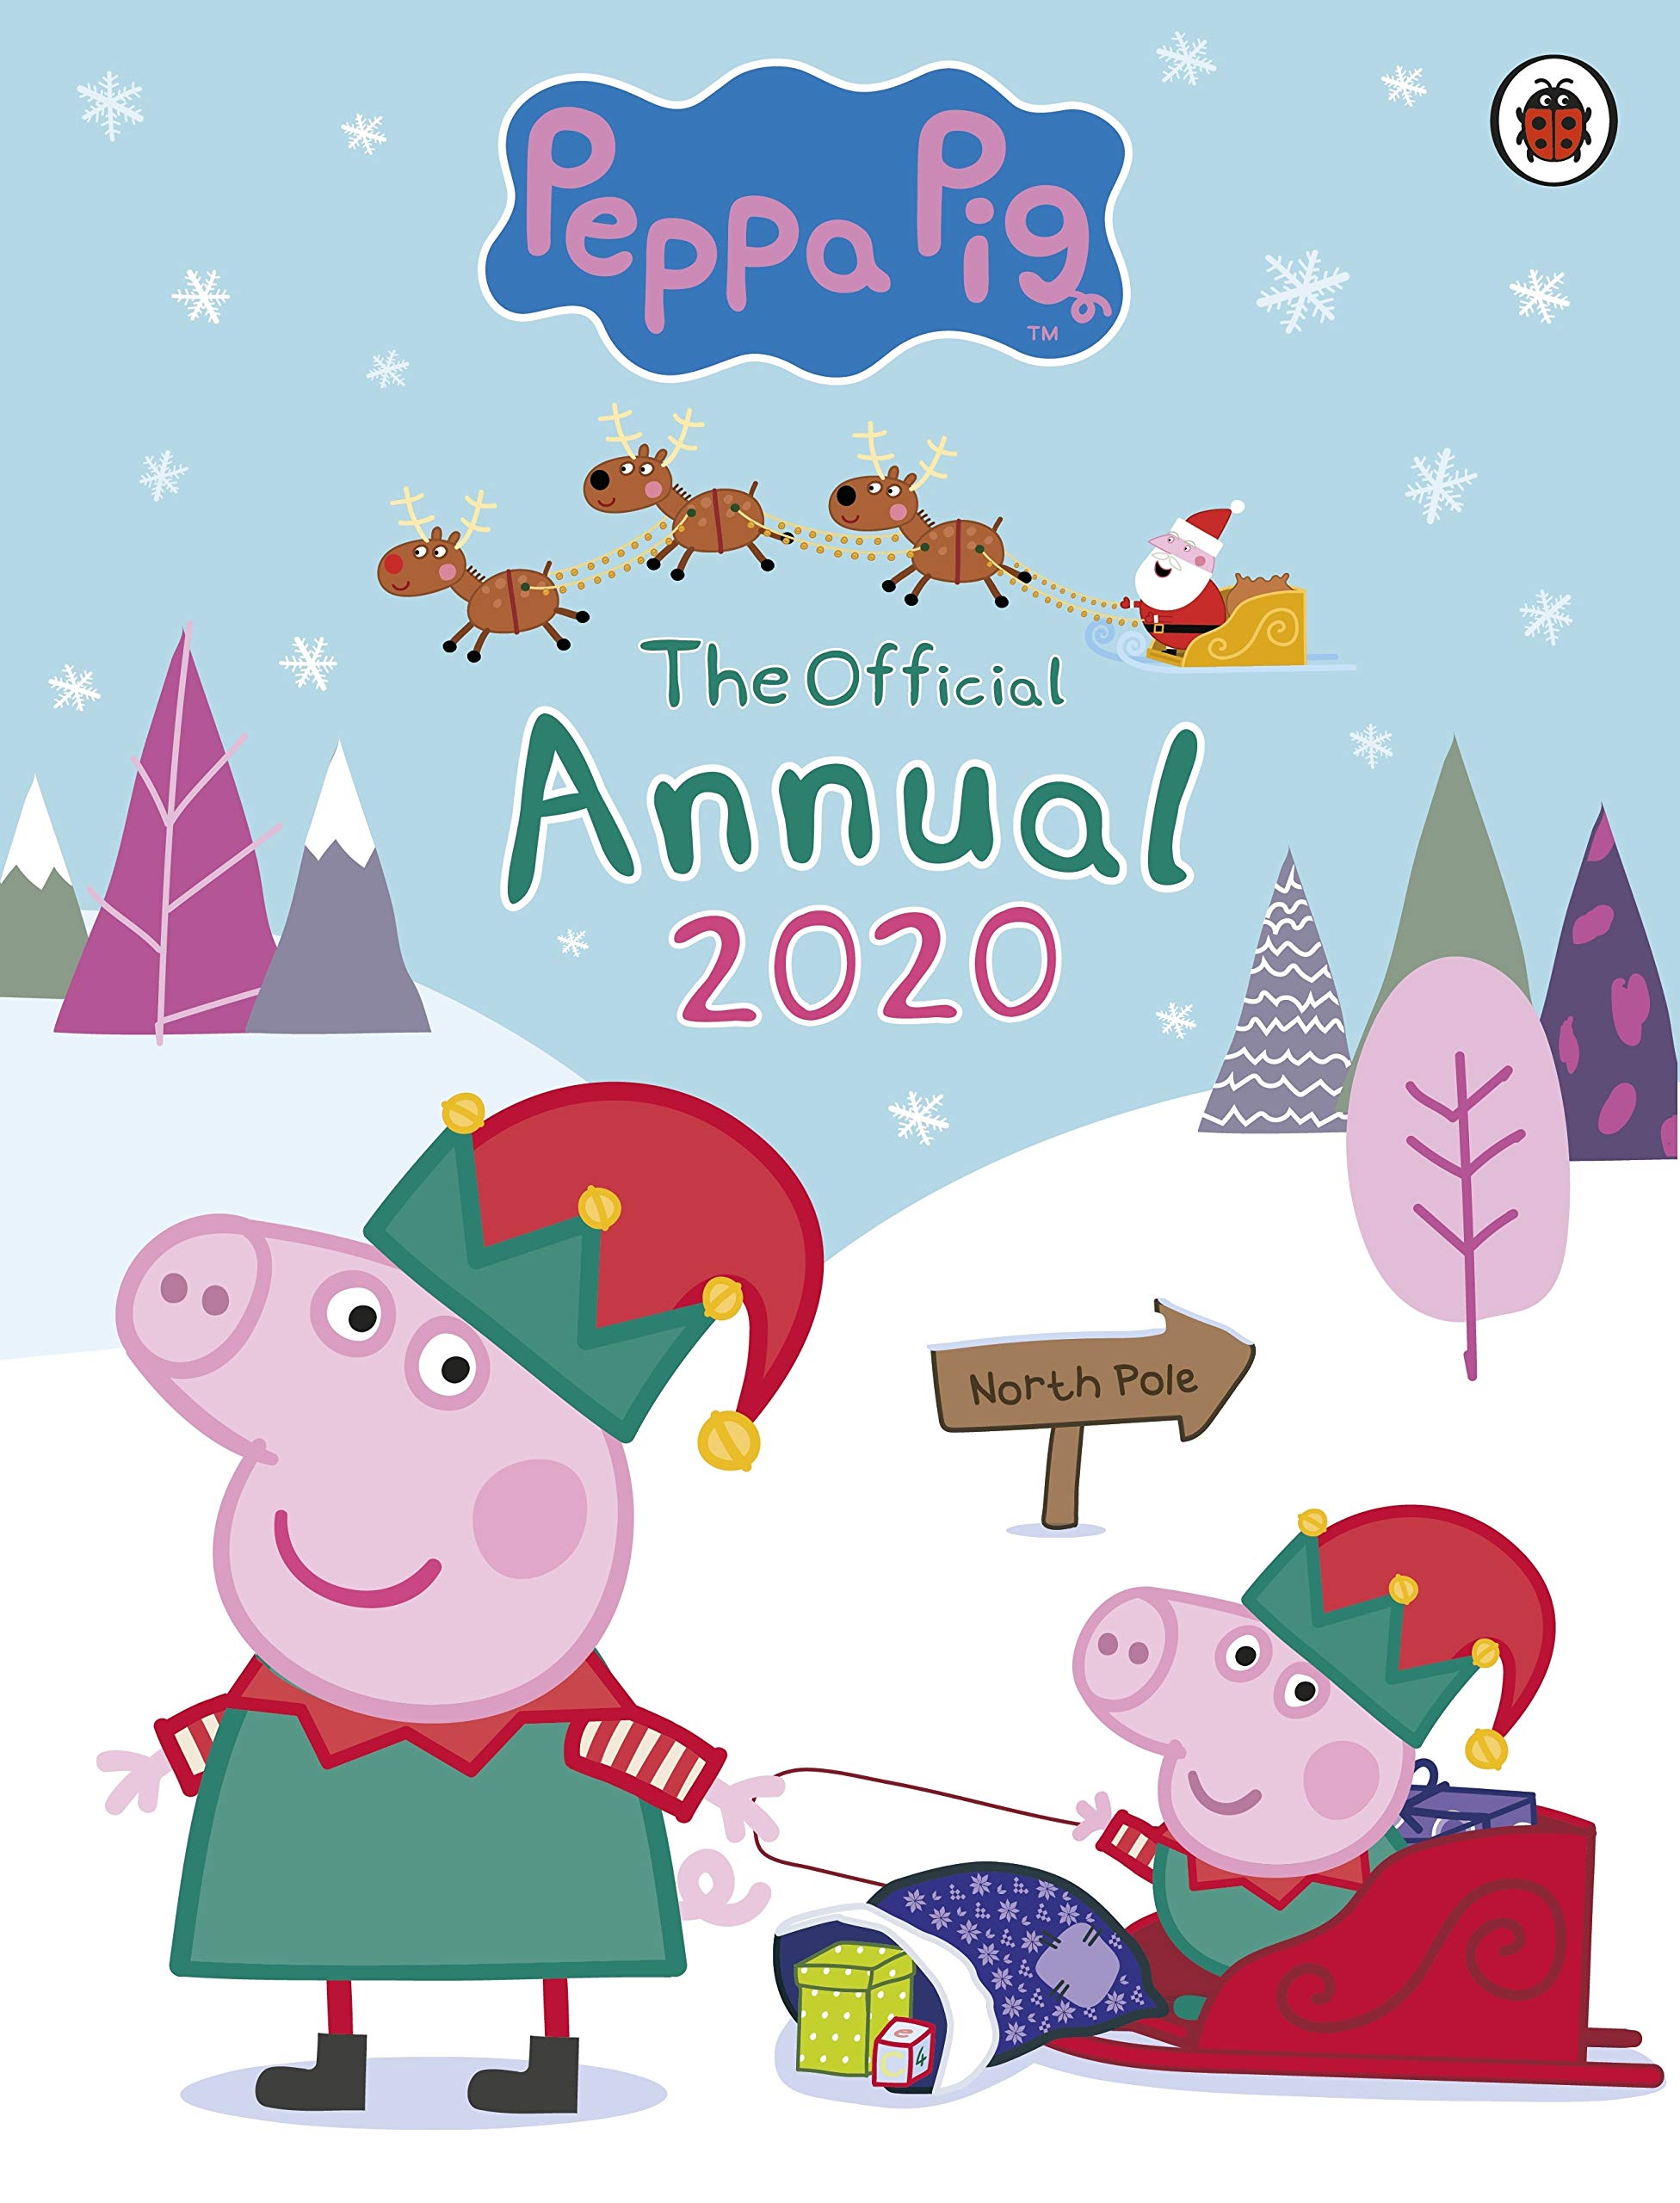 The Official Peppa Annual 2020